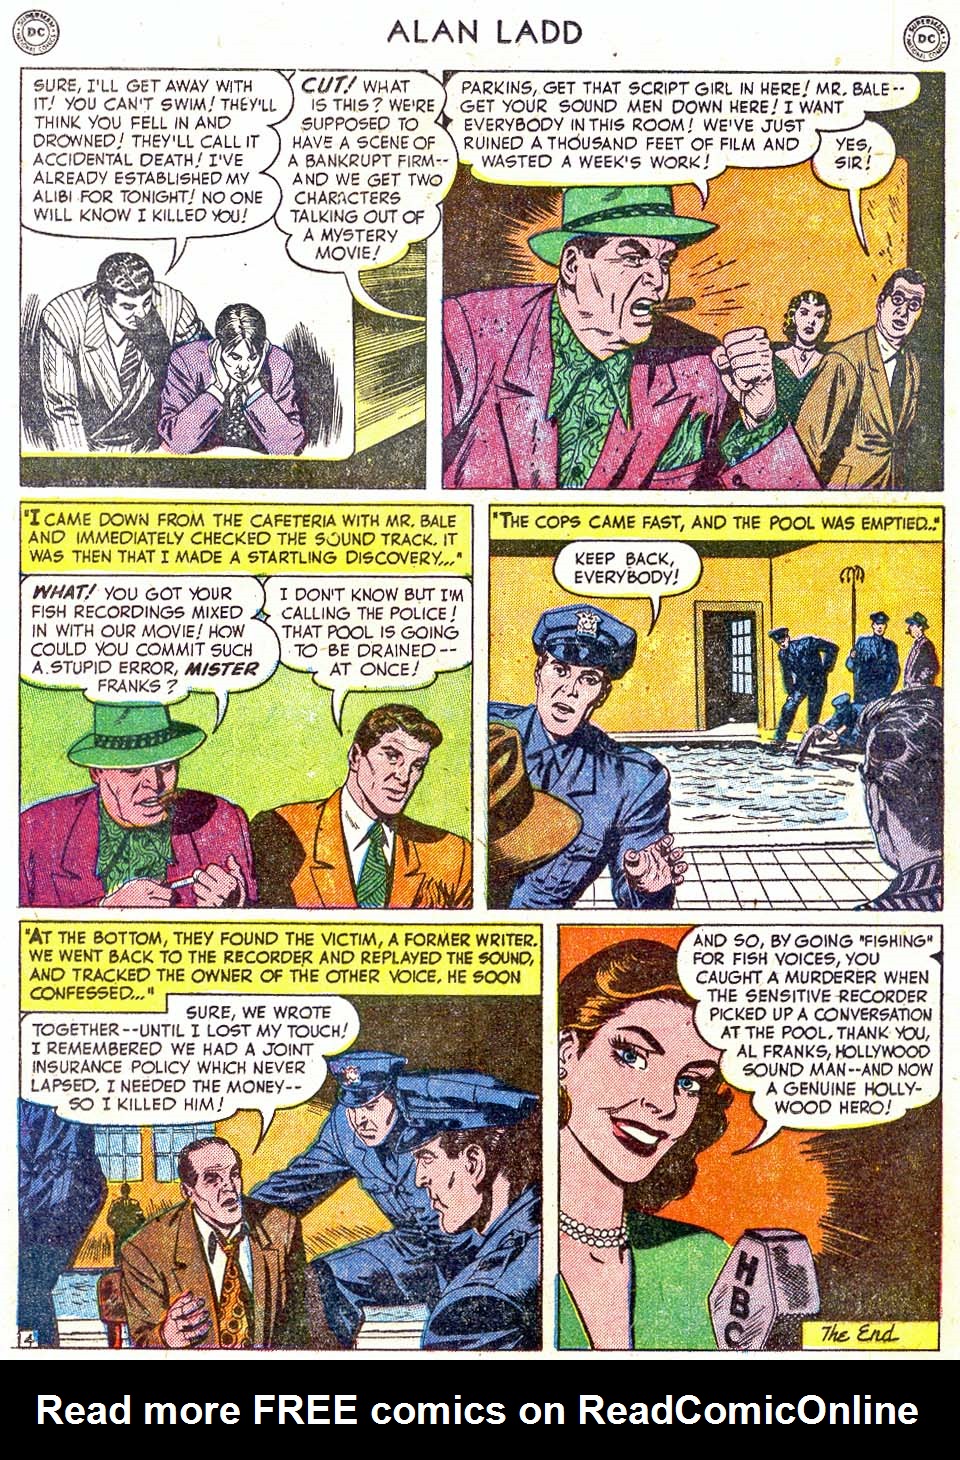 Adventures of Alan Ladd issue 6 - Page 18